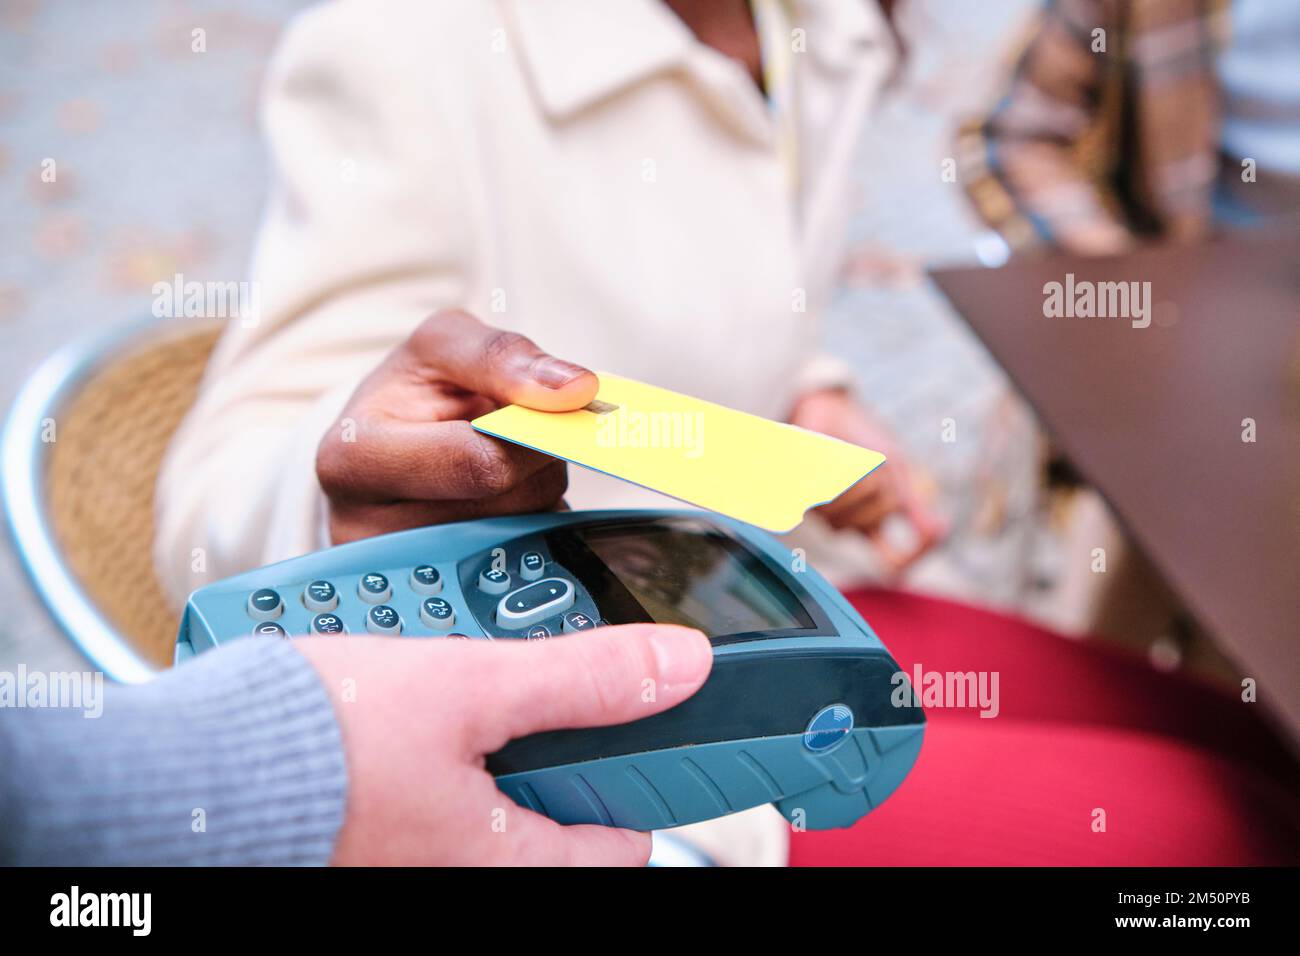 Close-up view of a person making contactless payment with credit card. Stock Photo